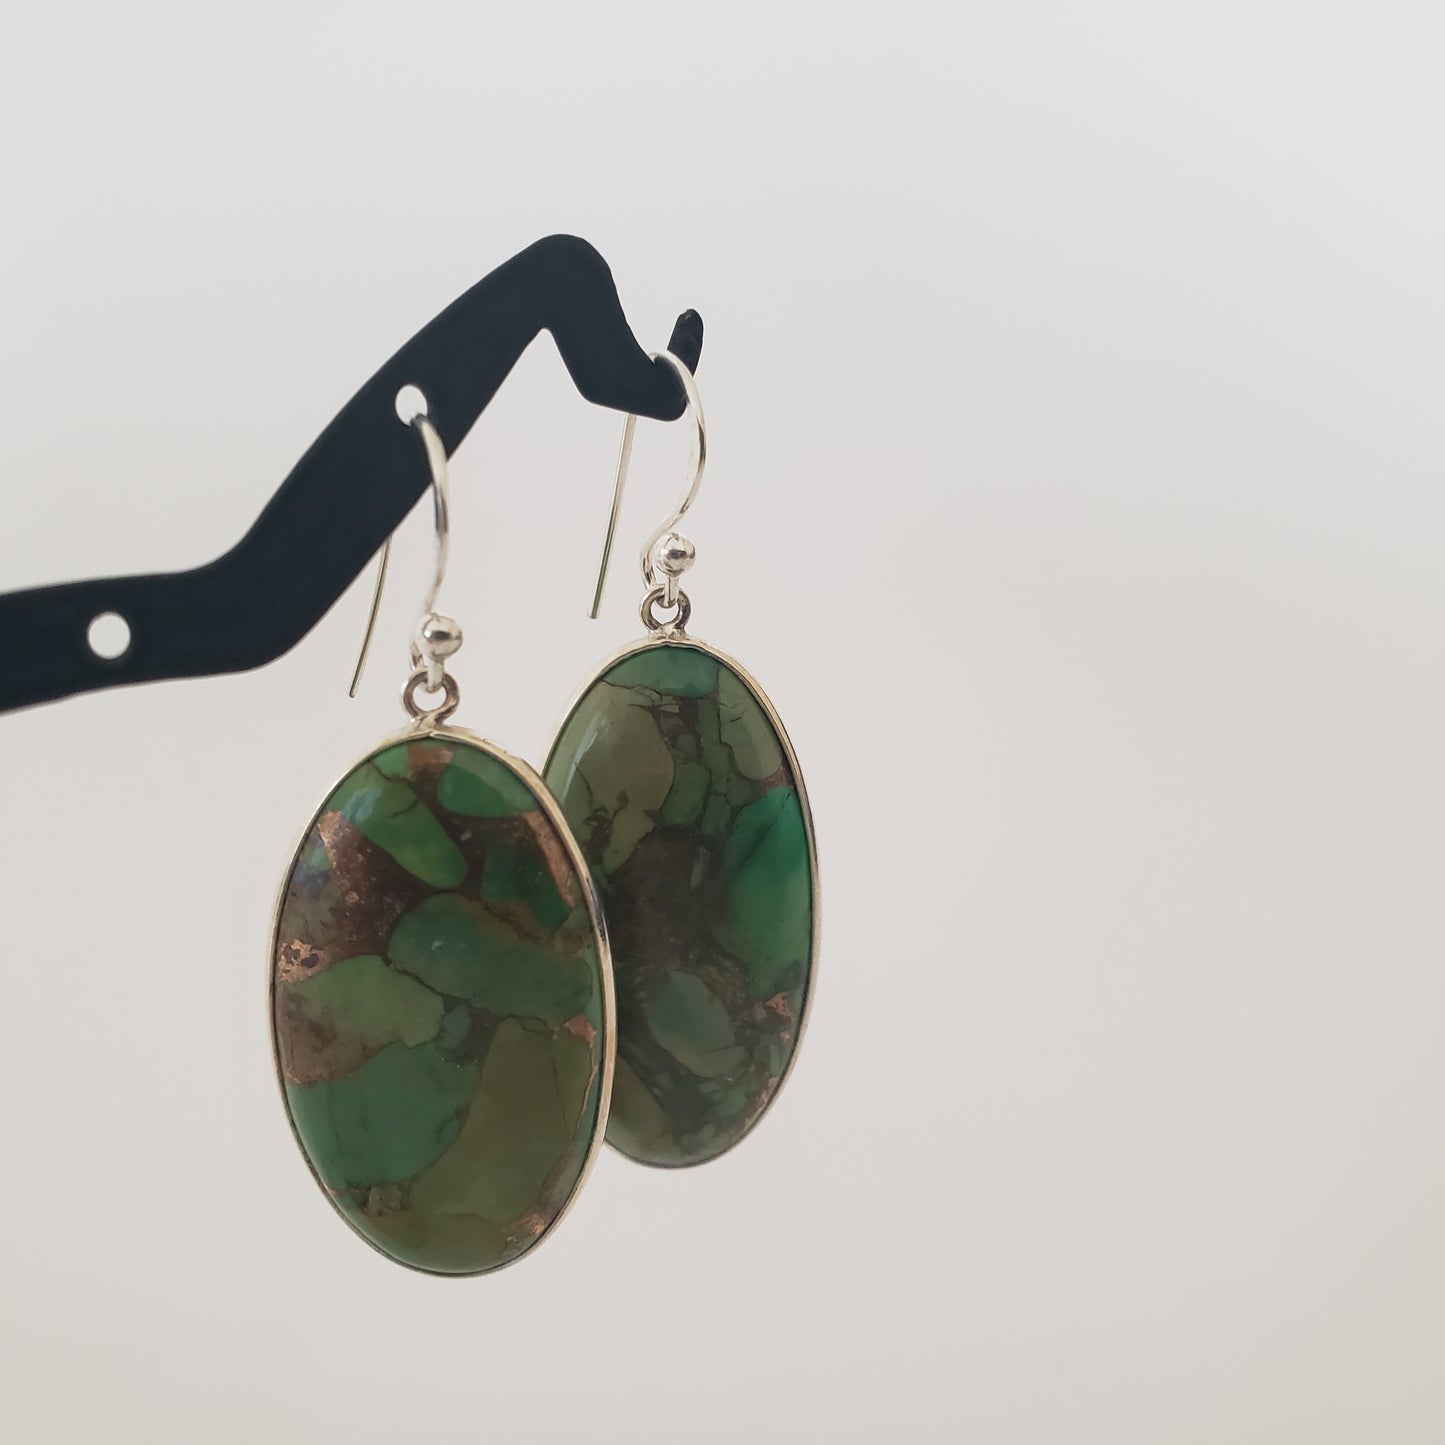 E Earrings,  Turquoise Picasso,  Sterling Silver